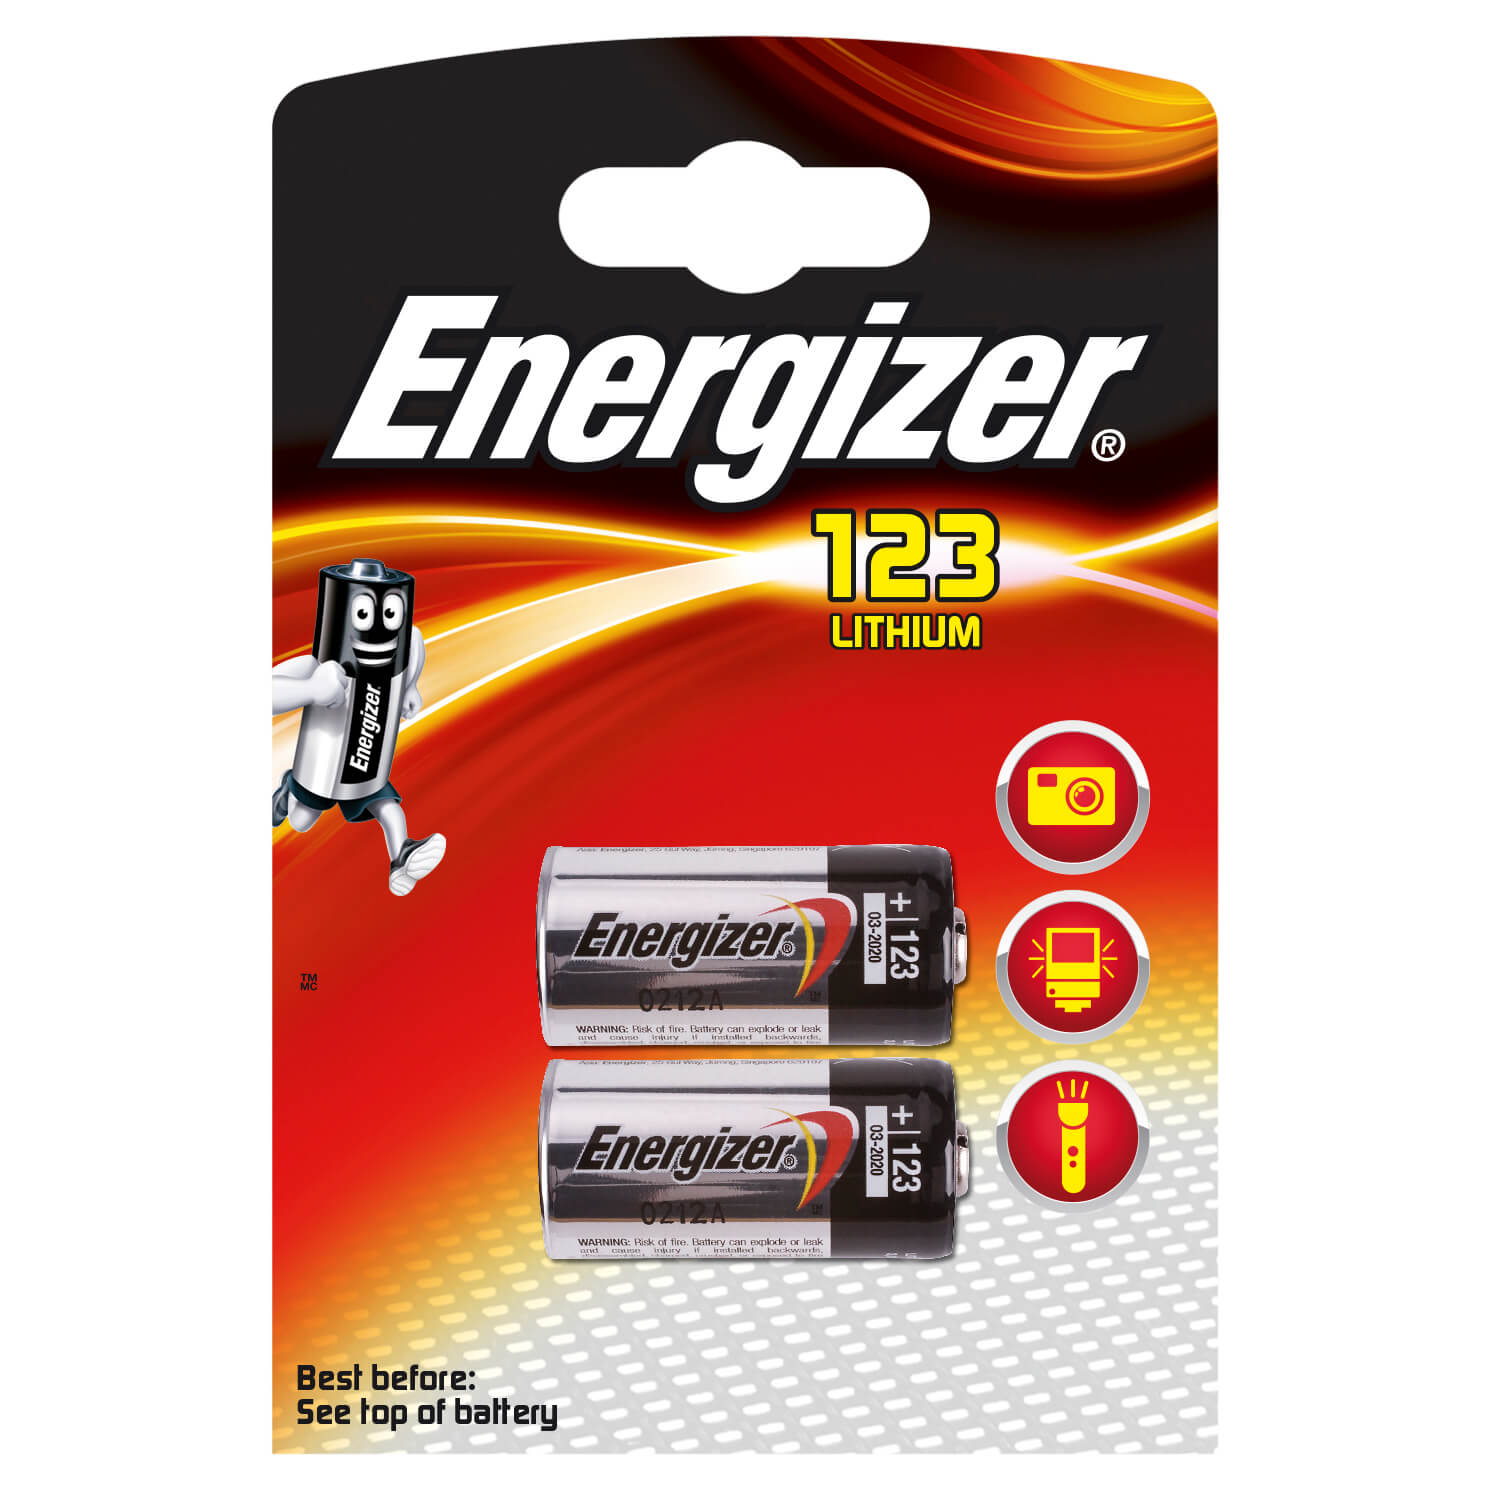 ENERGIZER Battery CR123 Lithium 2-pack